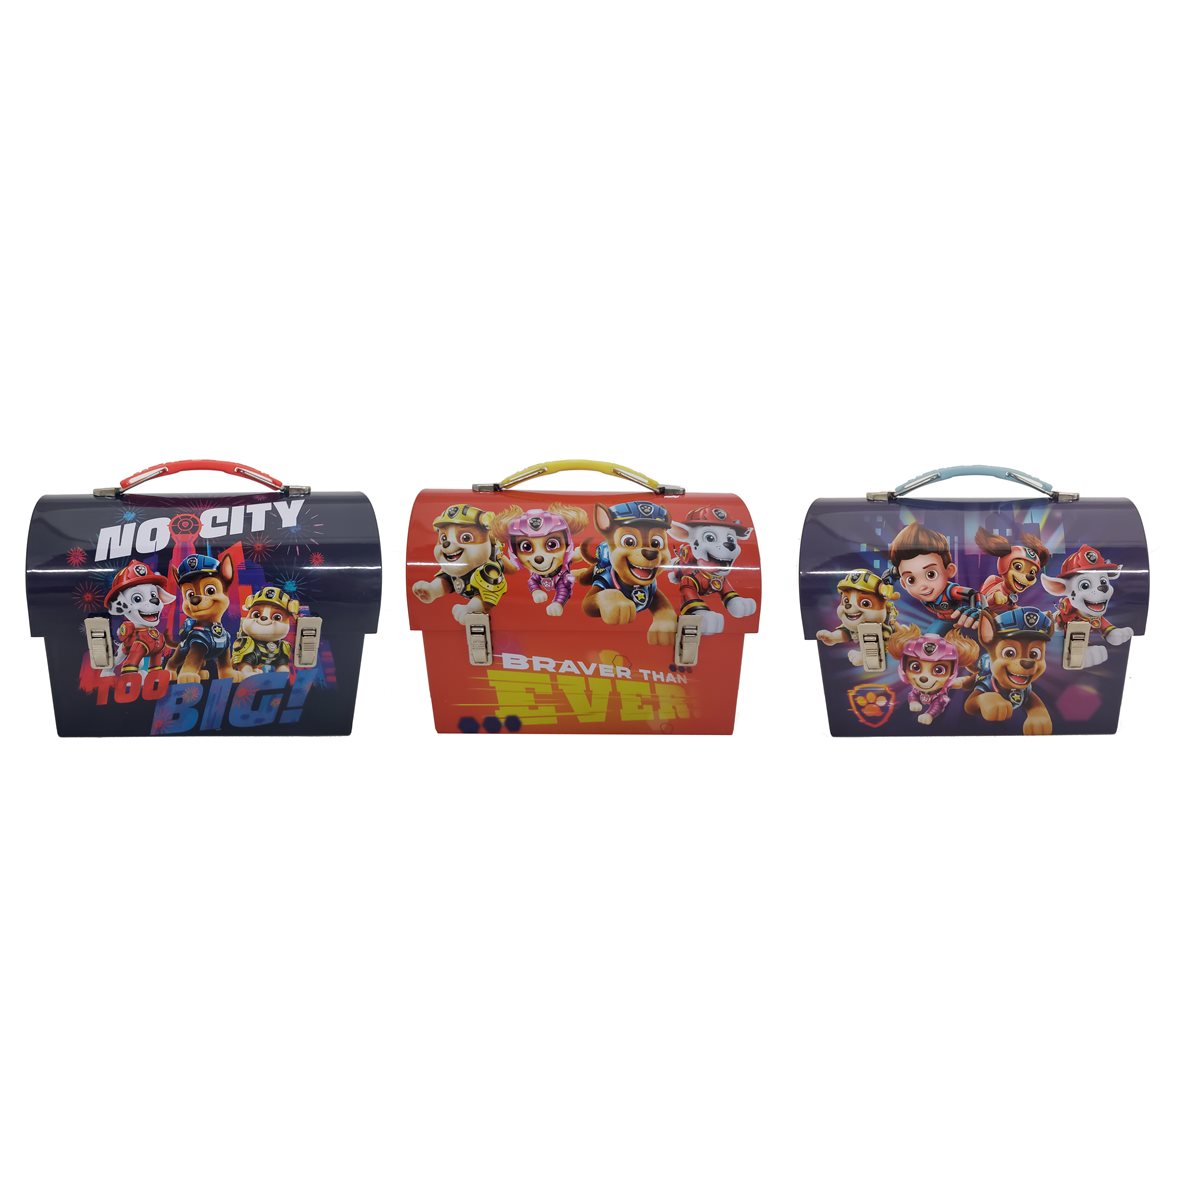 PAW PATROL: The Movie Workman's Tin Lunch Box (Marshall, Chase and Rubble)